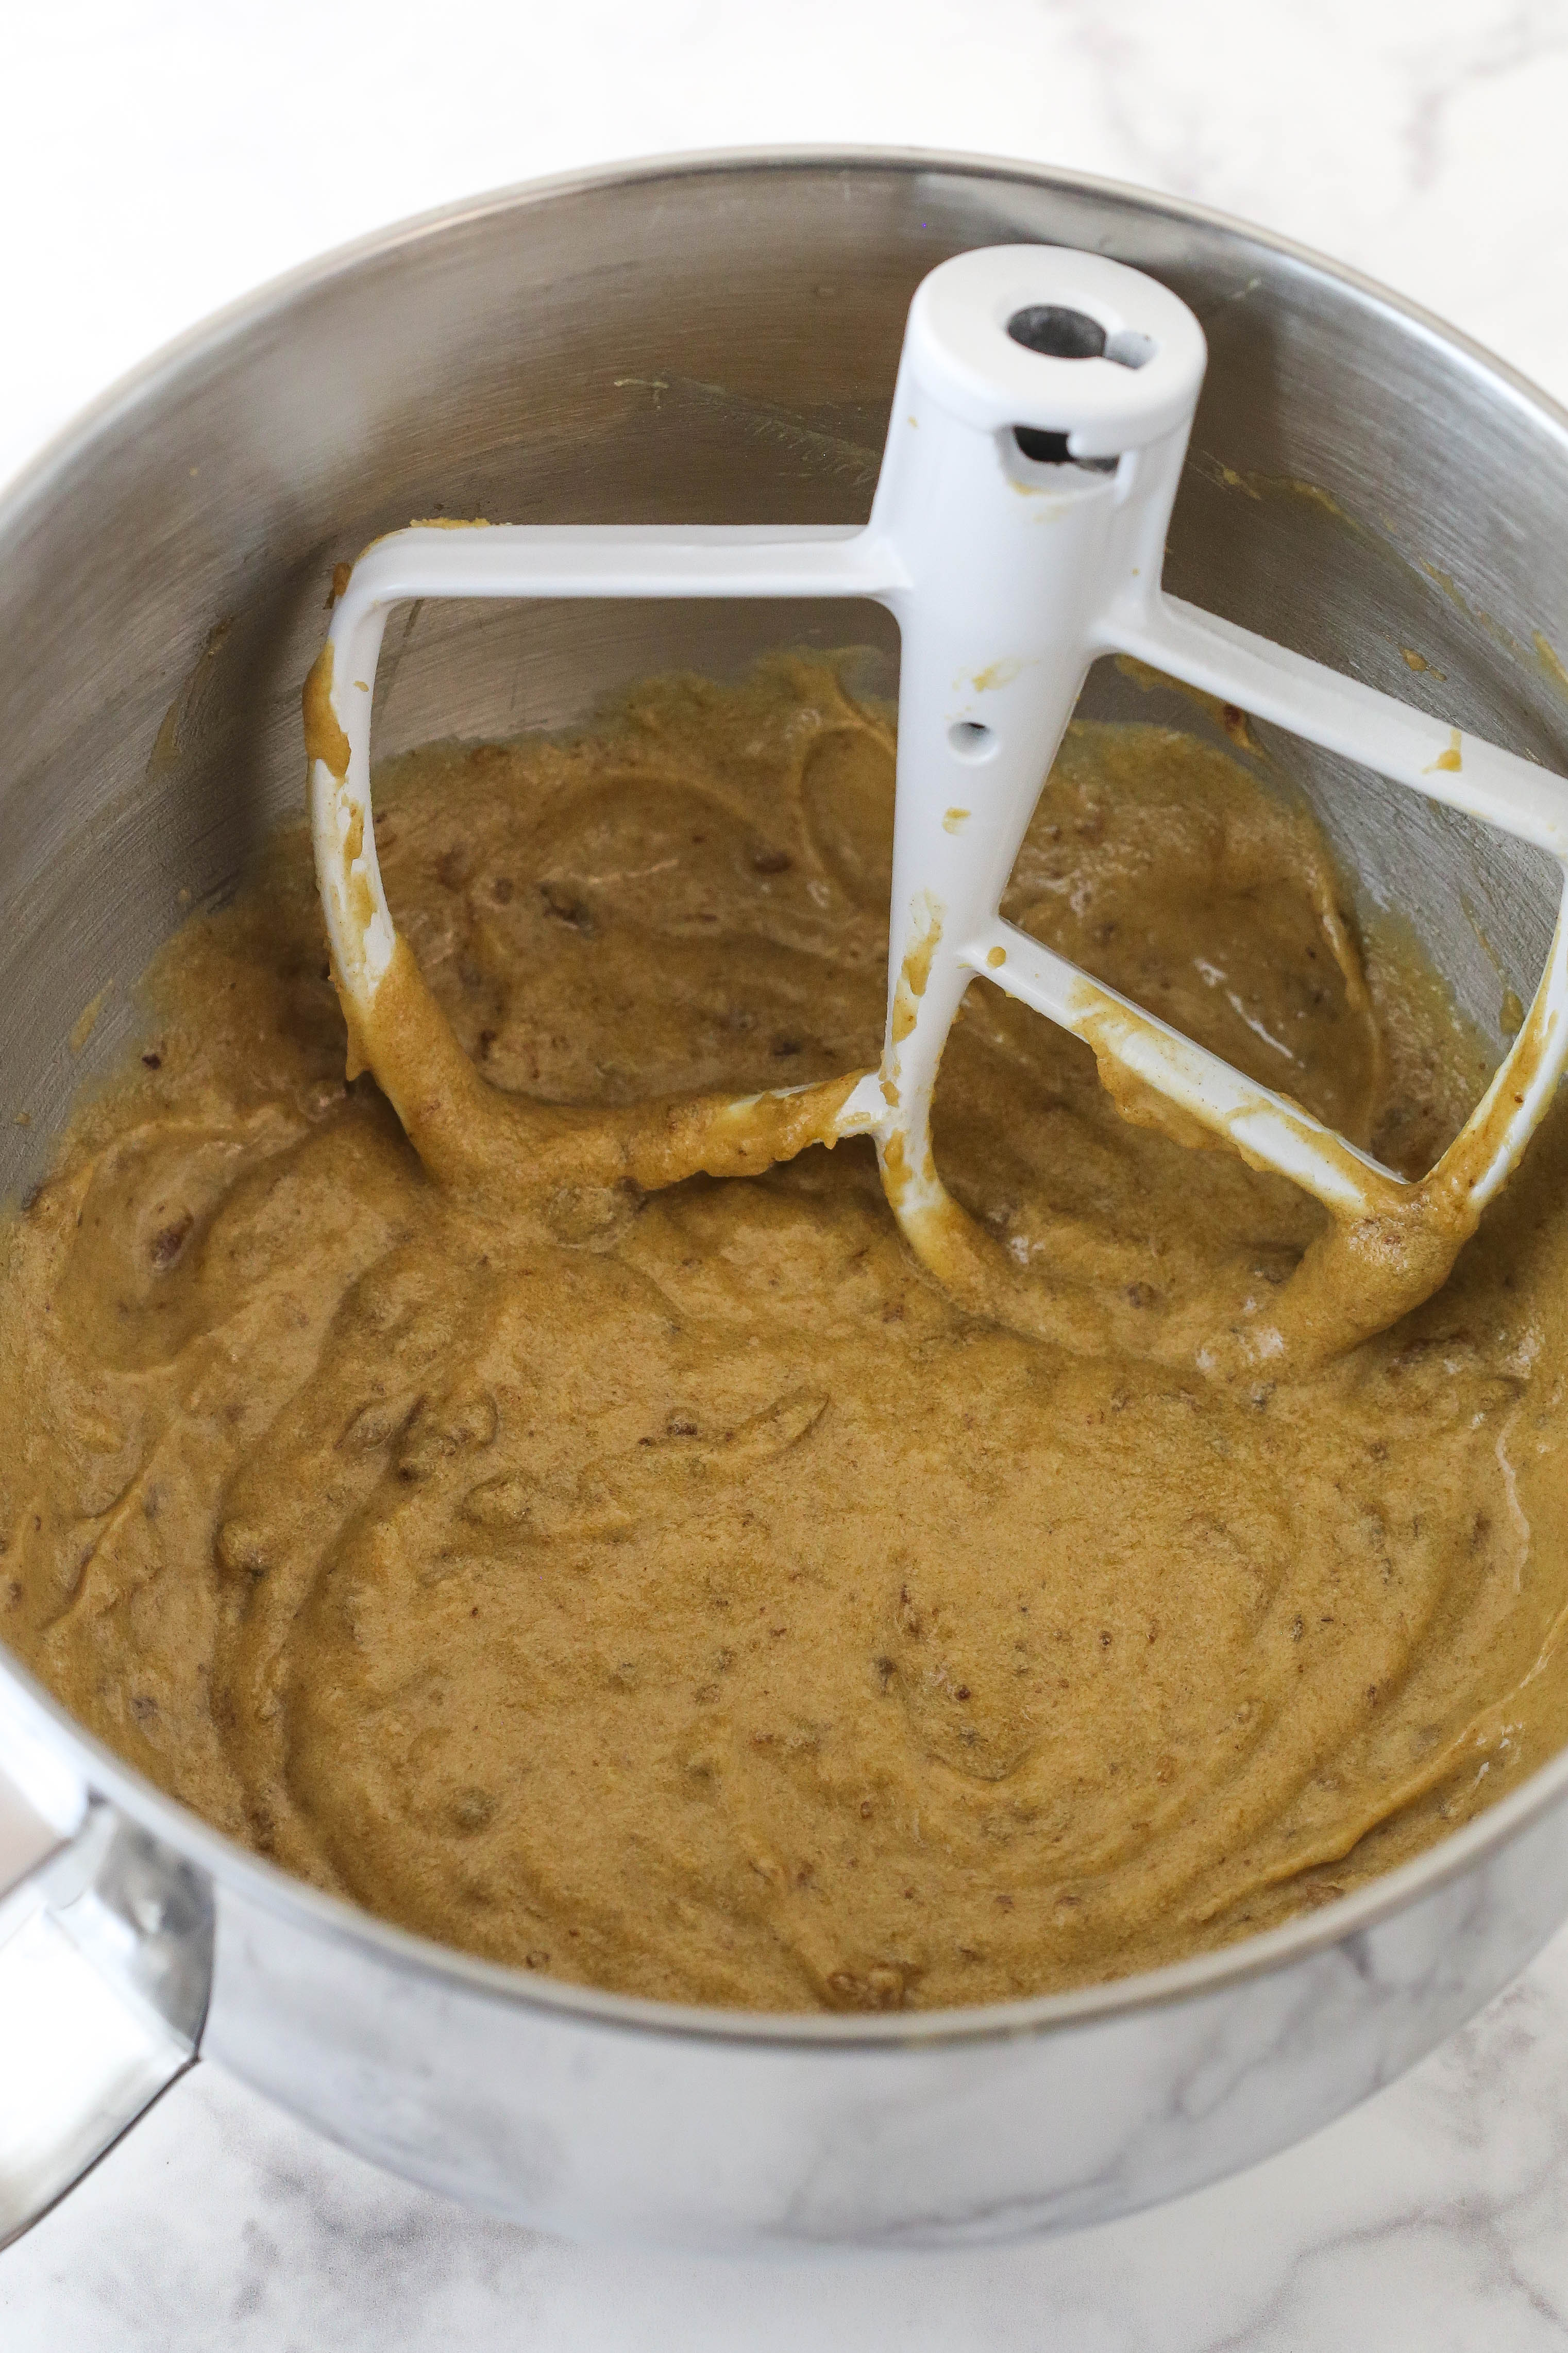 Fully mixed sticky toffee pudding batter